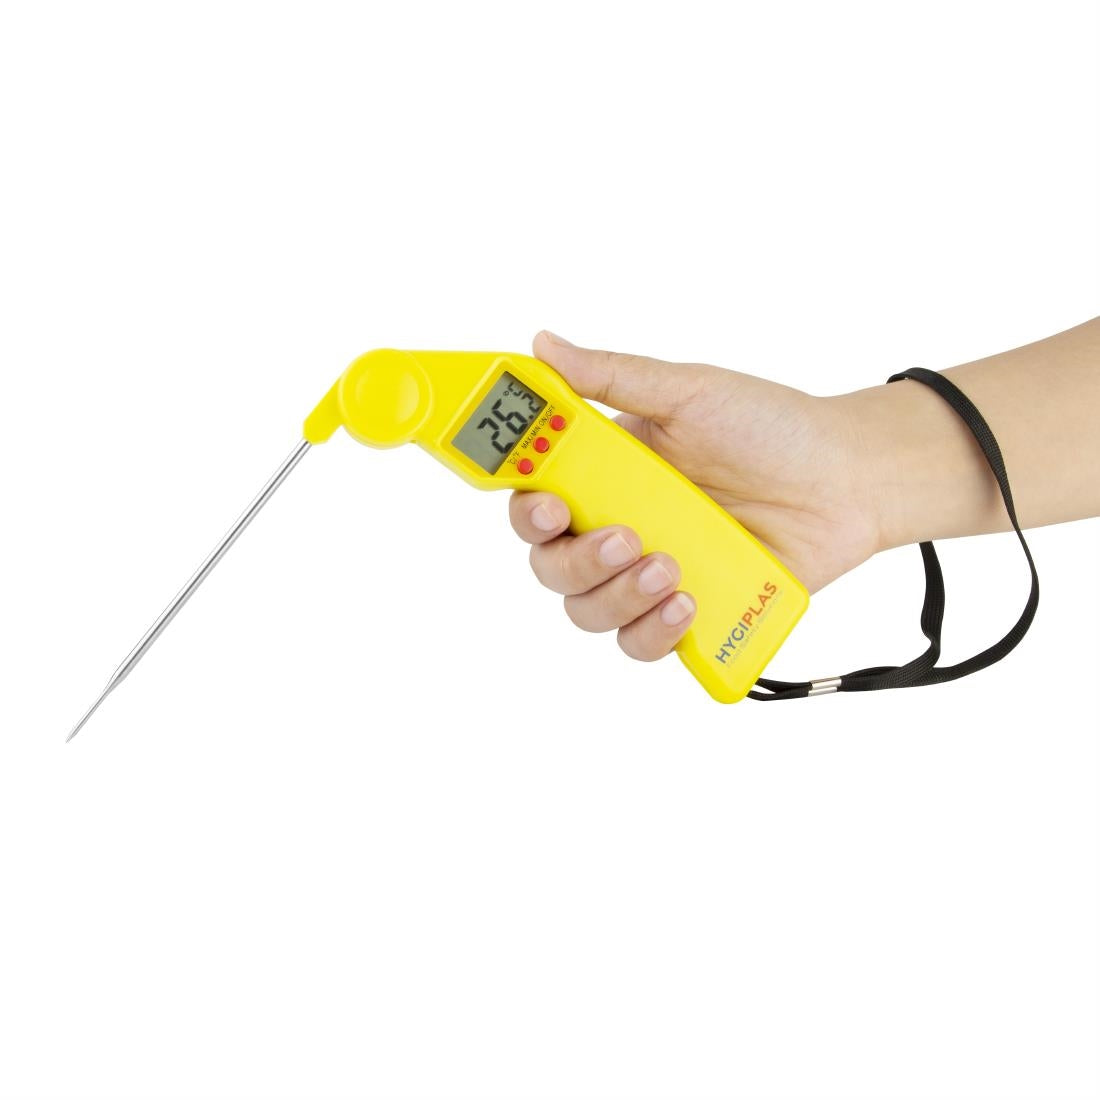 EDLP - Hygiplas EasyTemp Thermometer Yellow - Cooked Meat